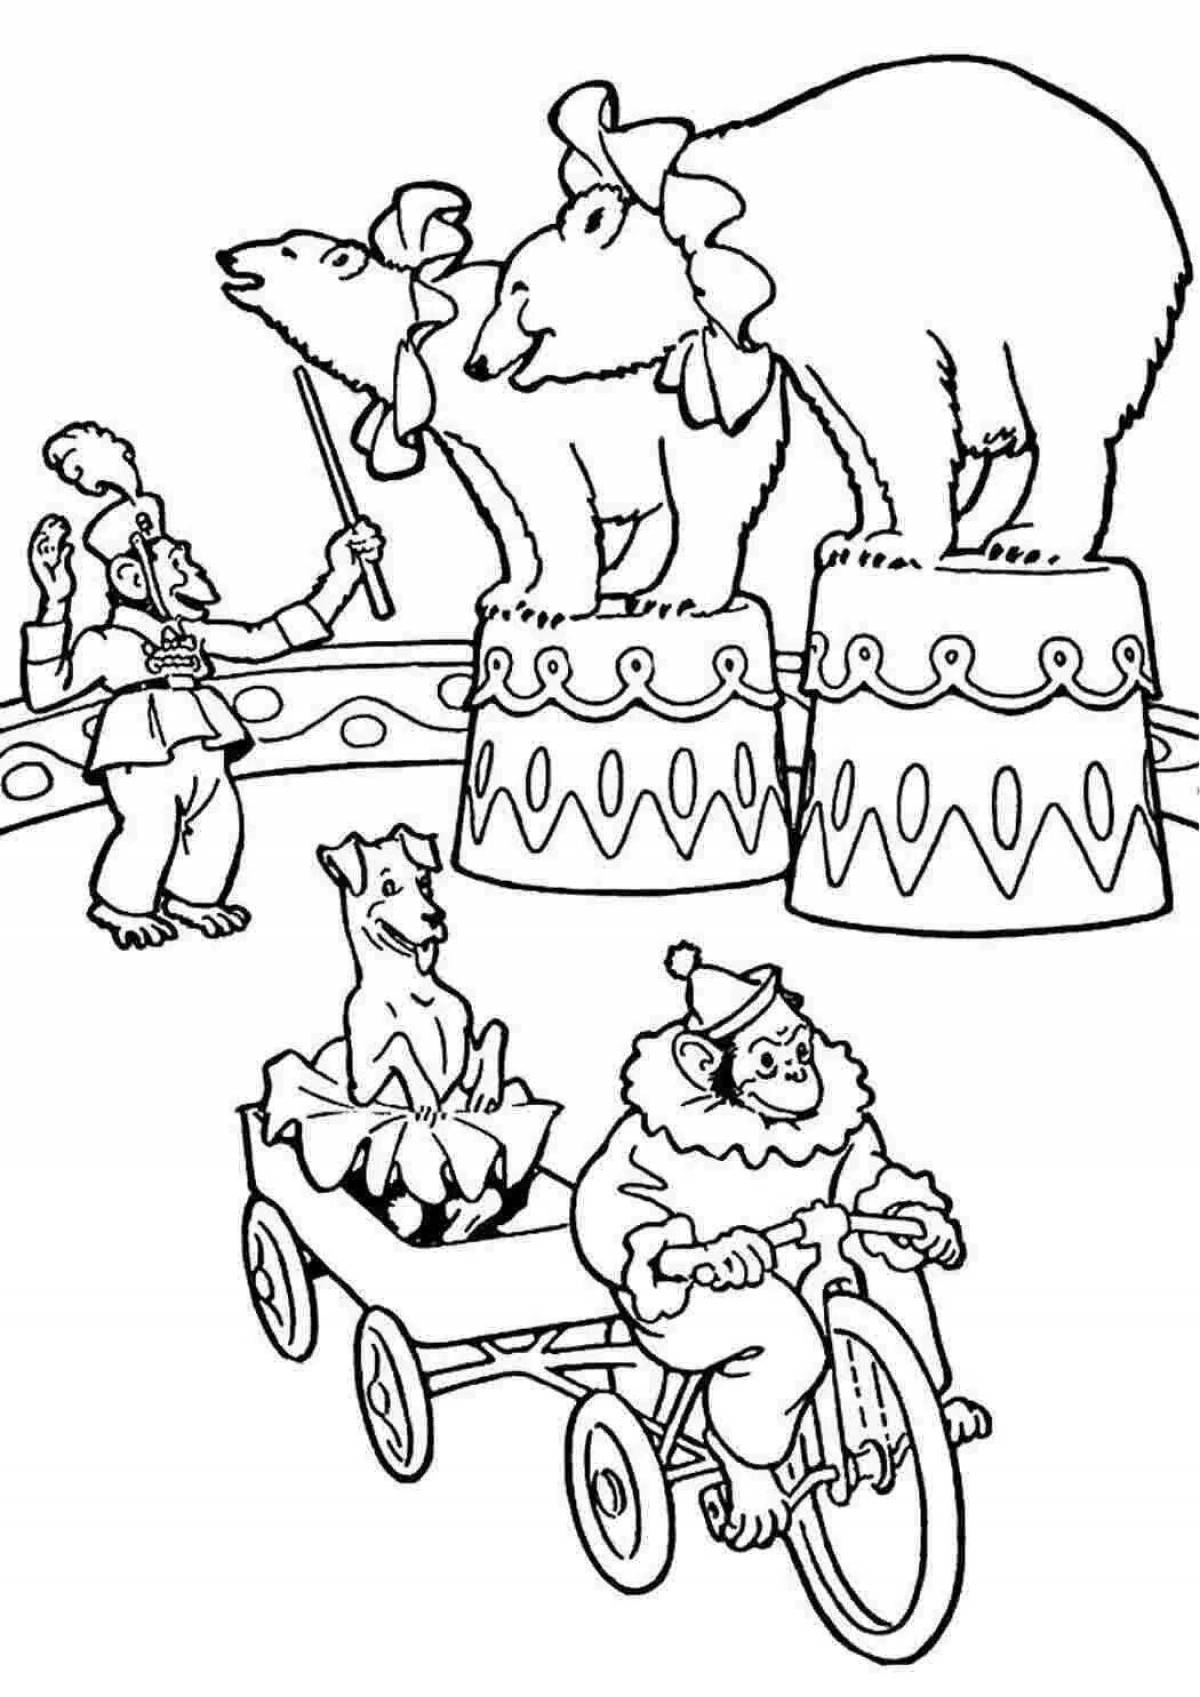 Coloring page jubilant circus for kids